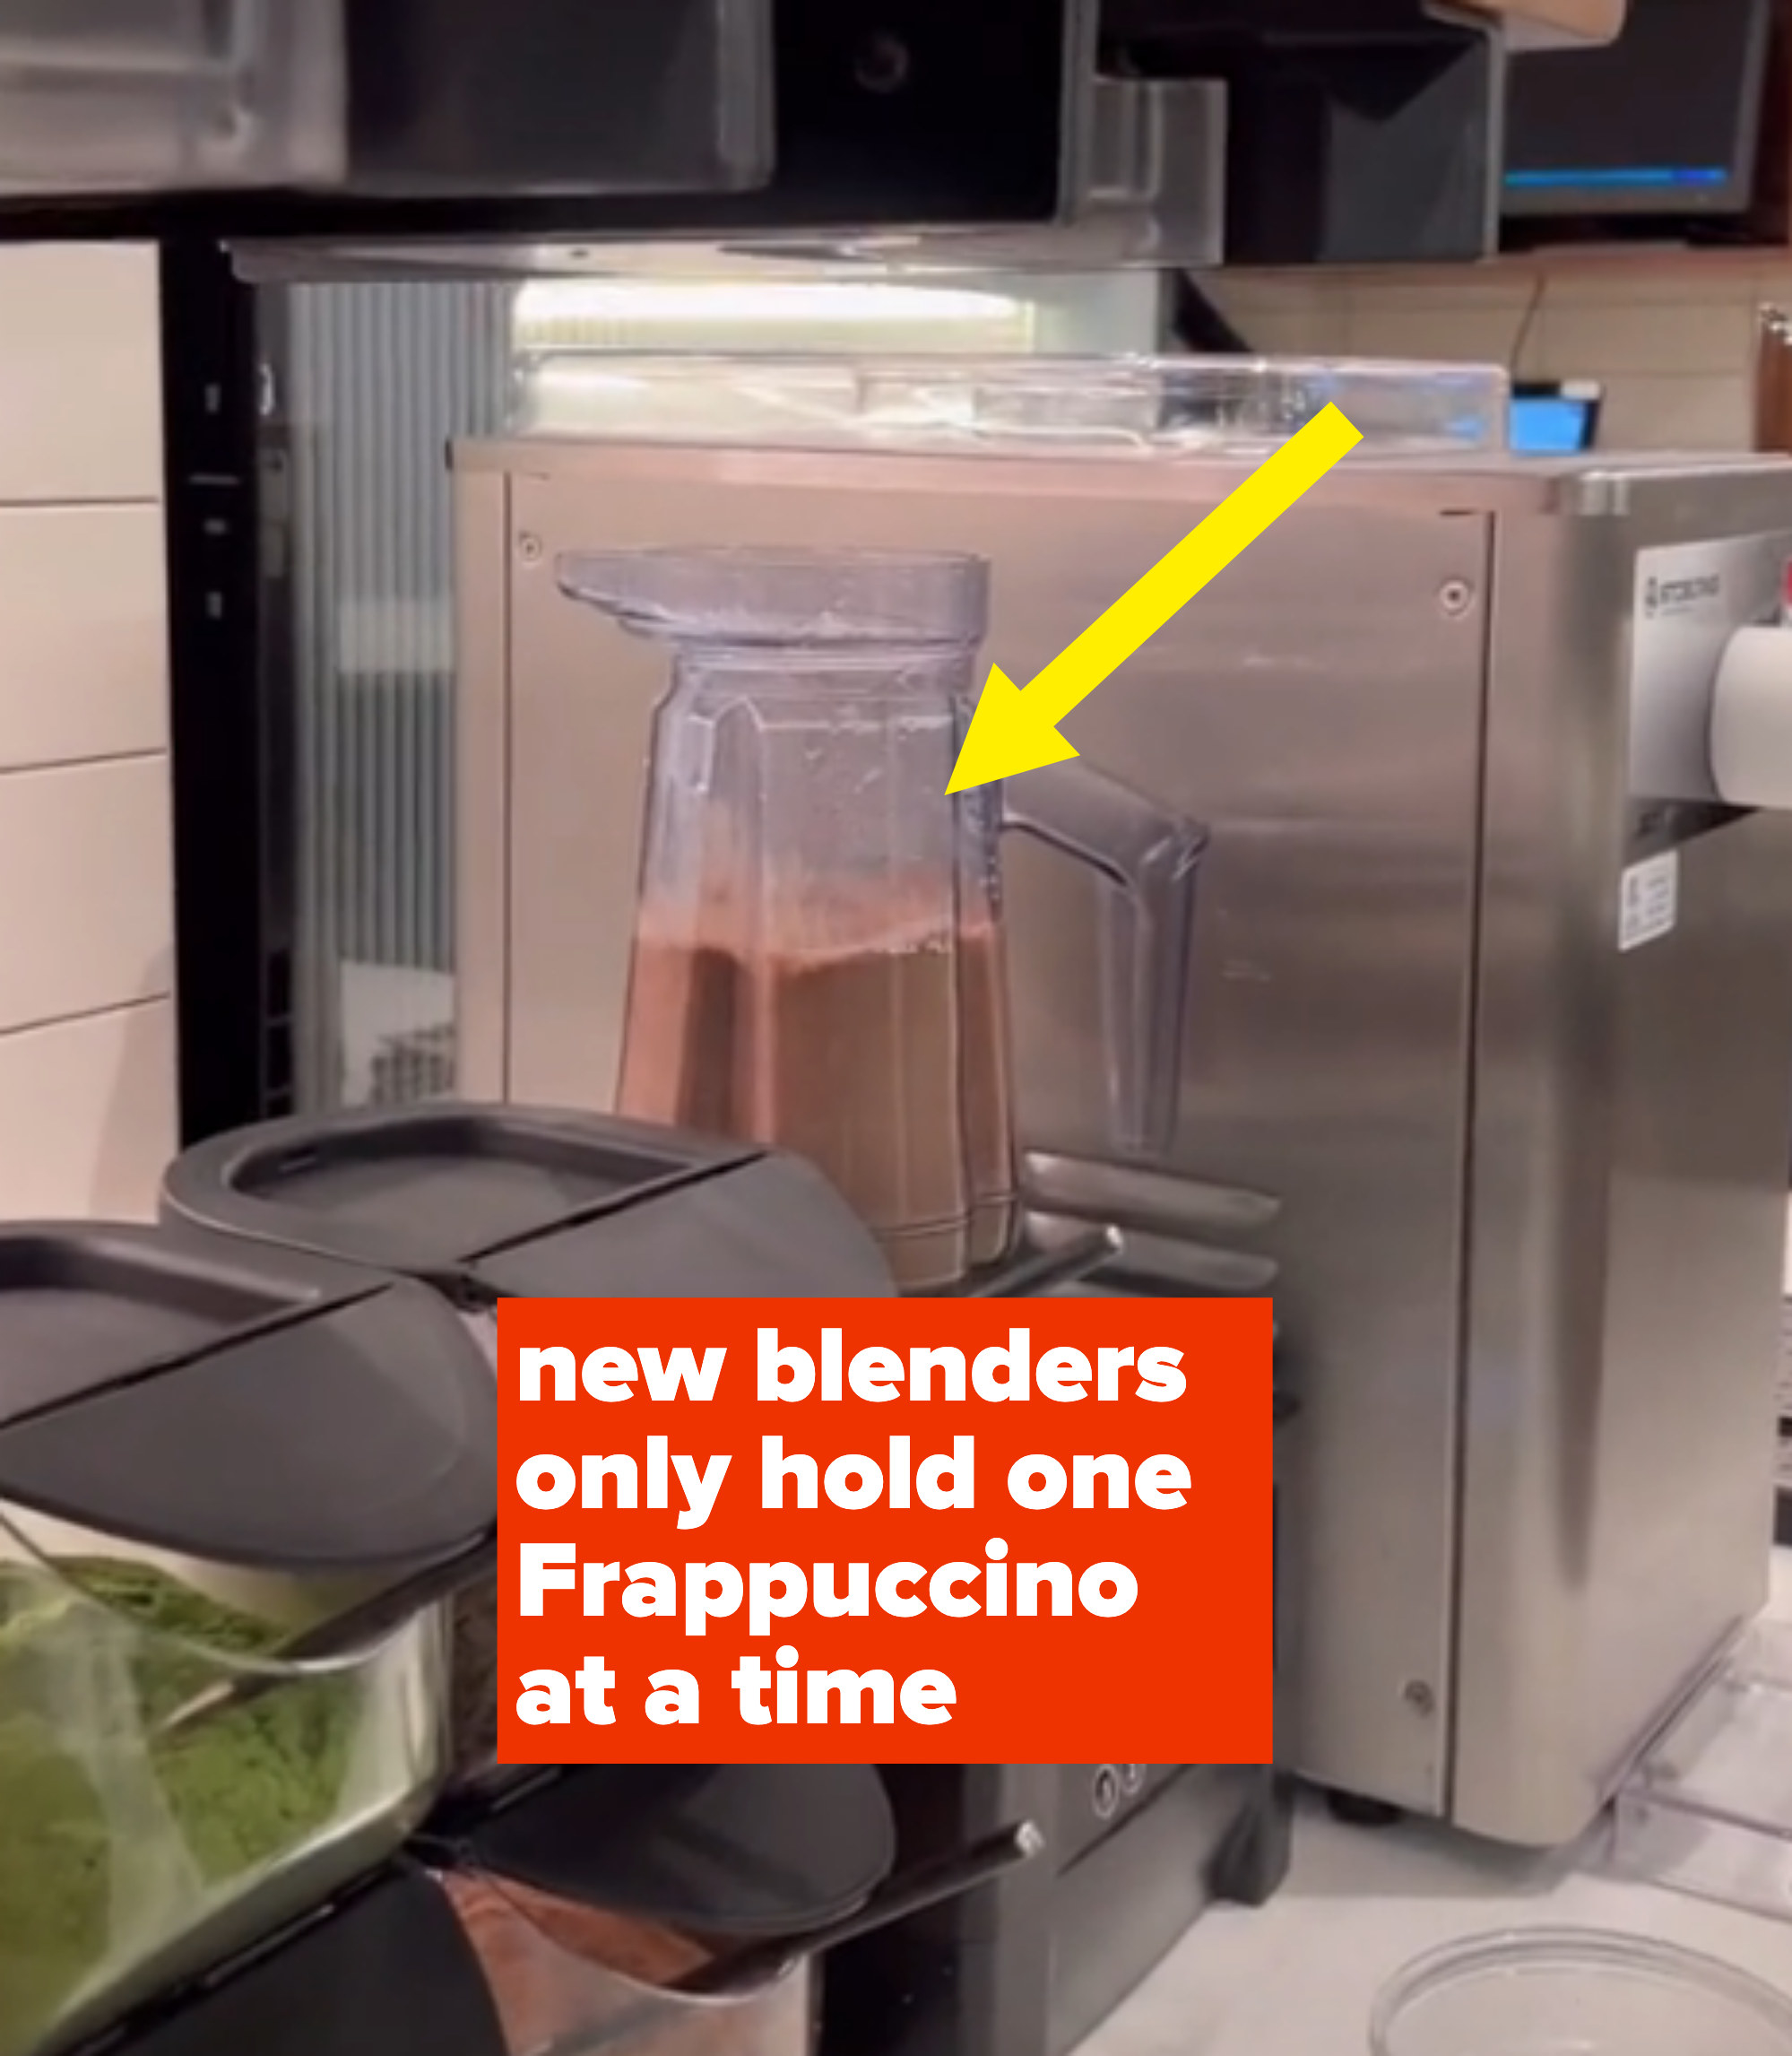 arrow pointing to new blender that significantly smaller and only blends one drink at a time